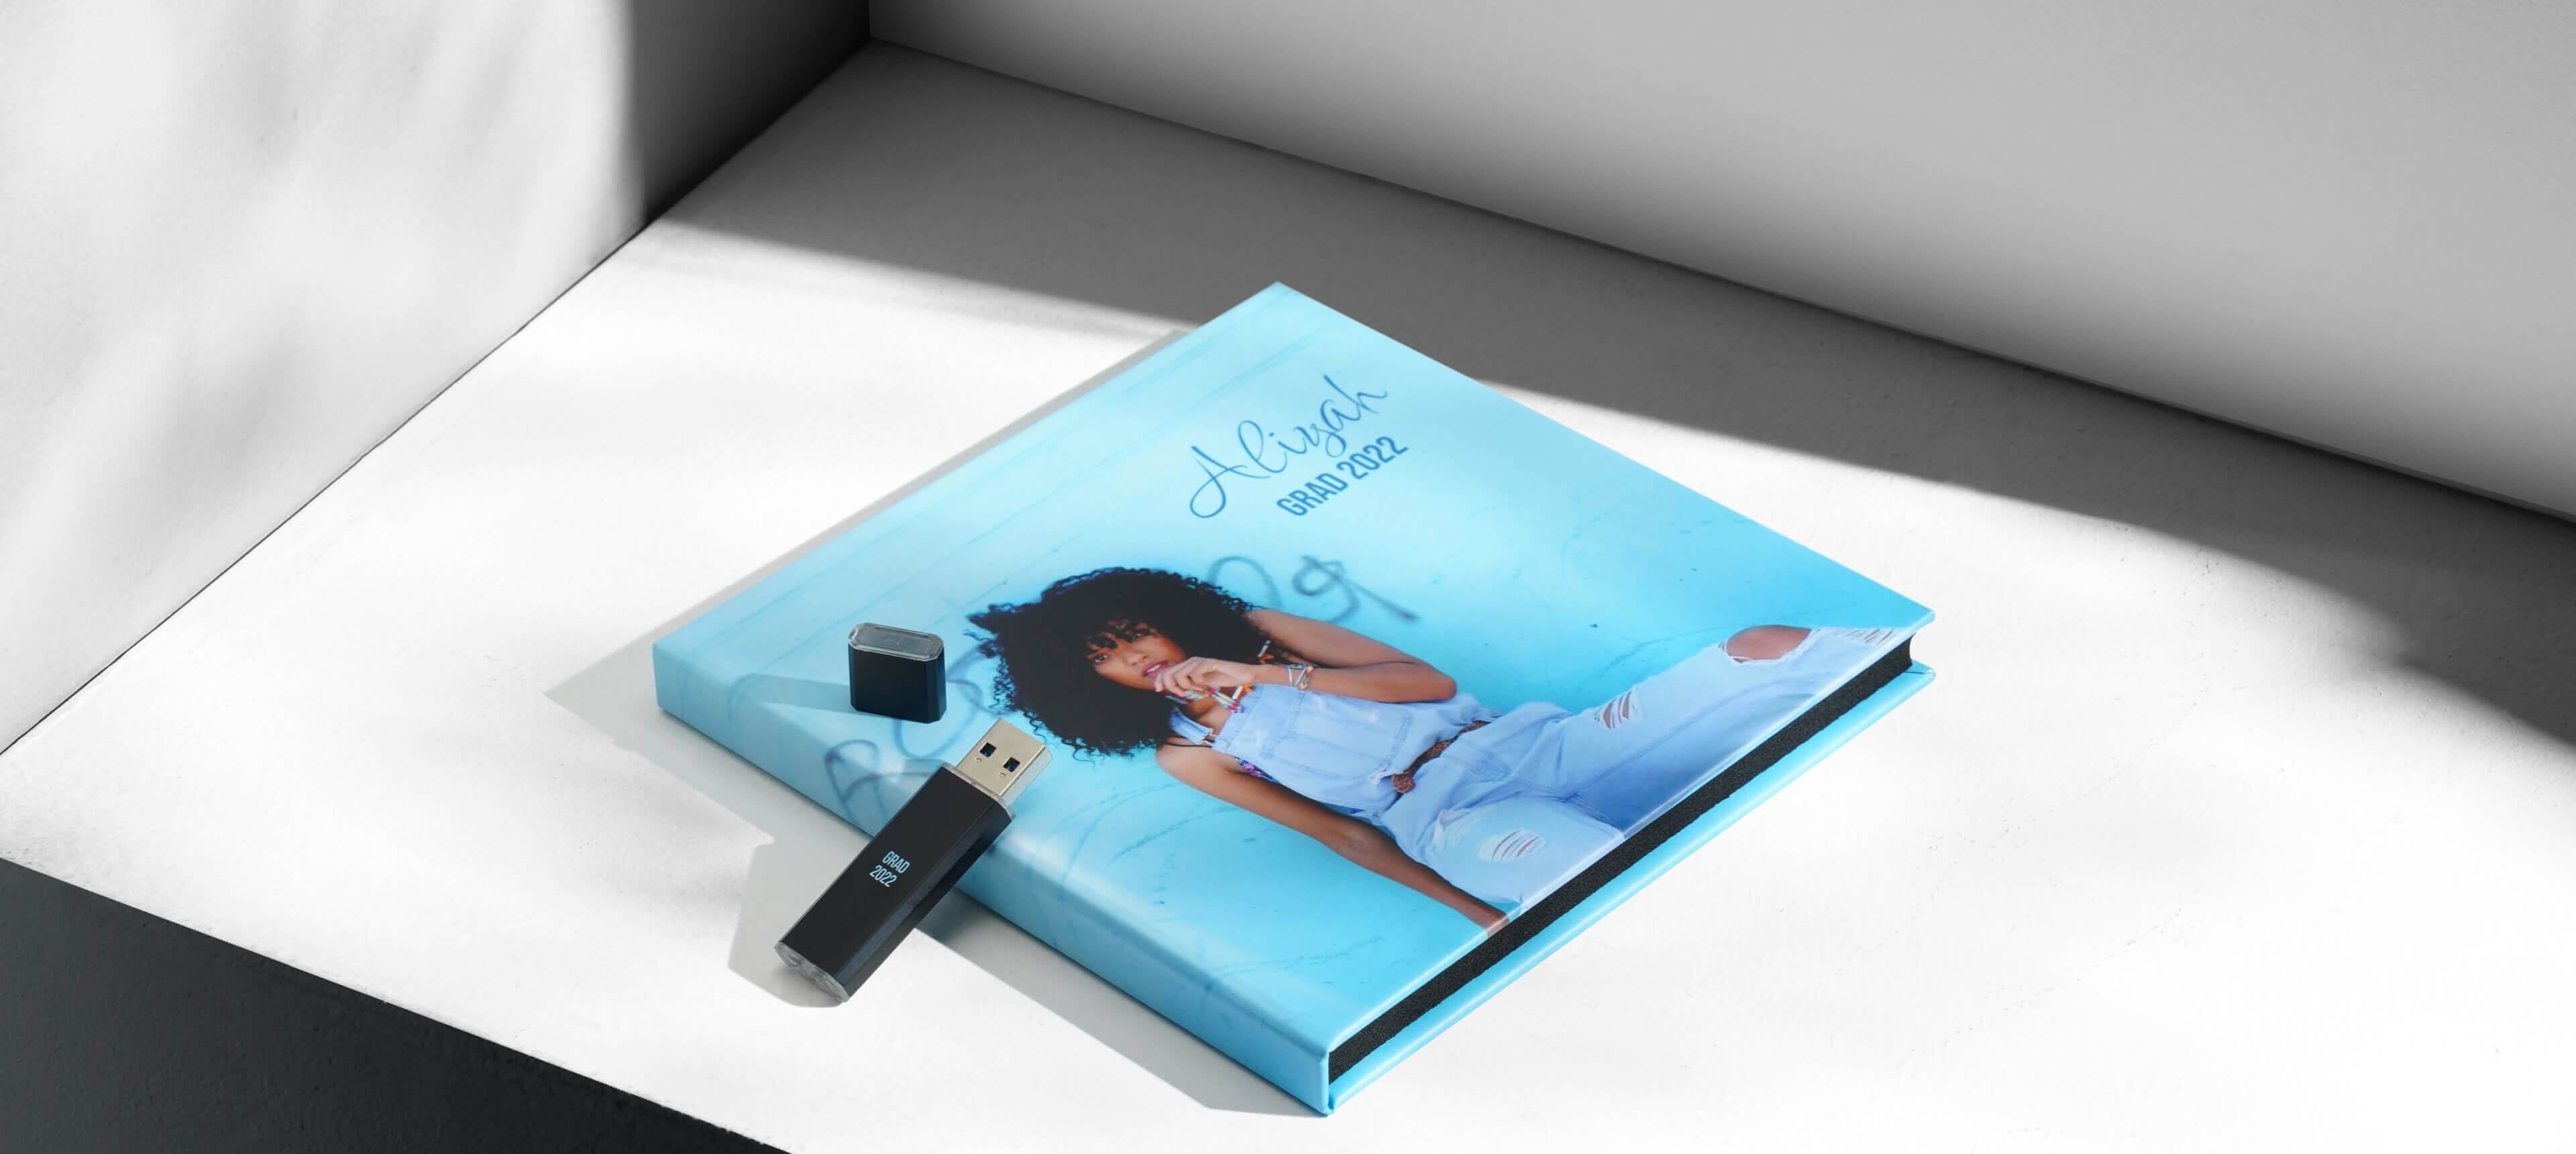 a metal usb drive leaning against a case showing a woman in jeans